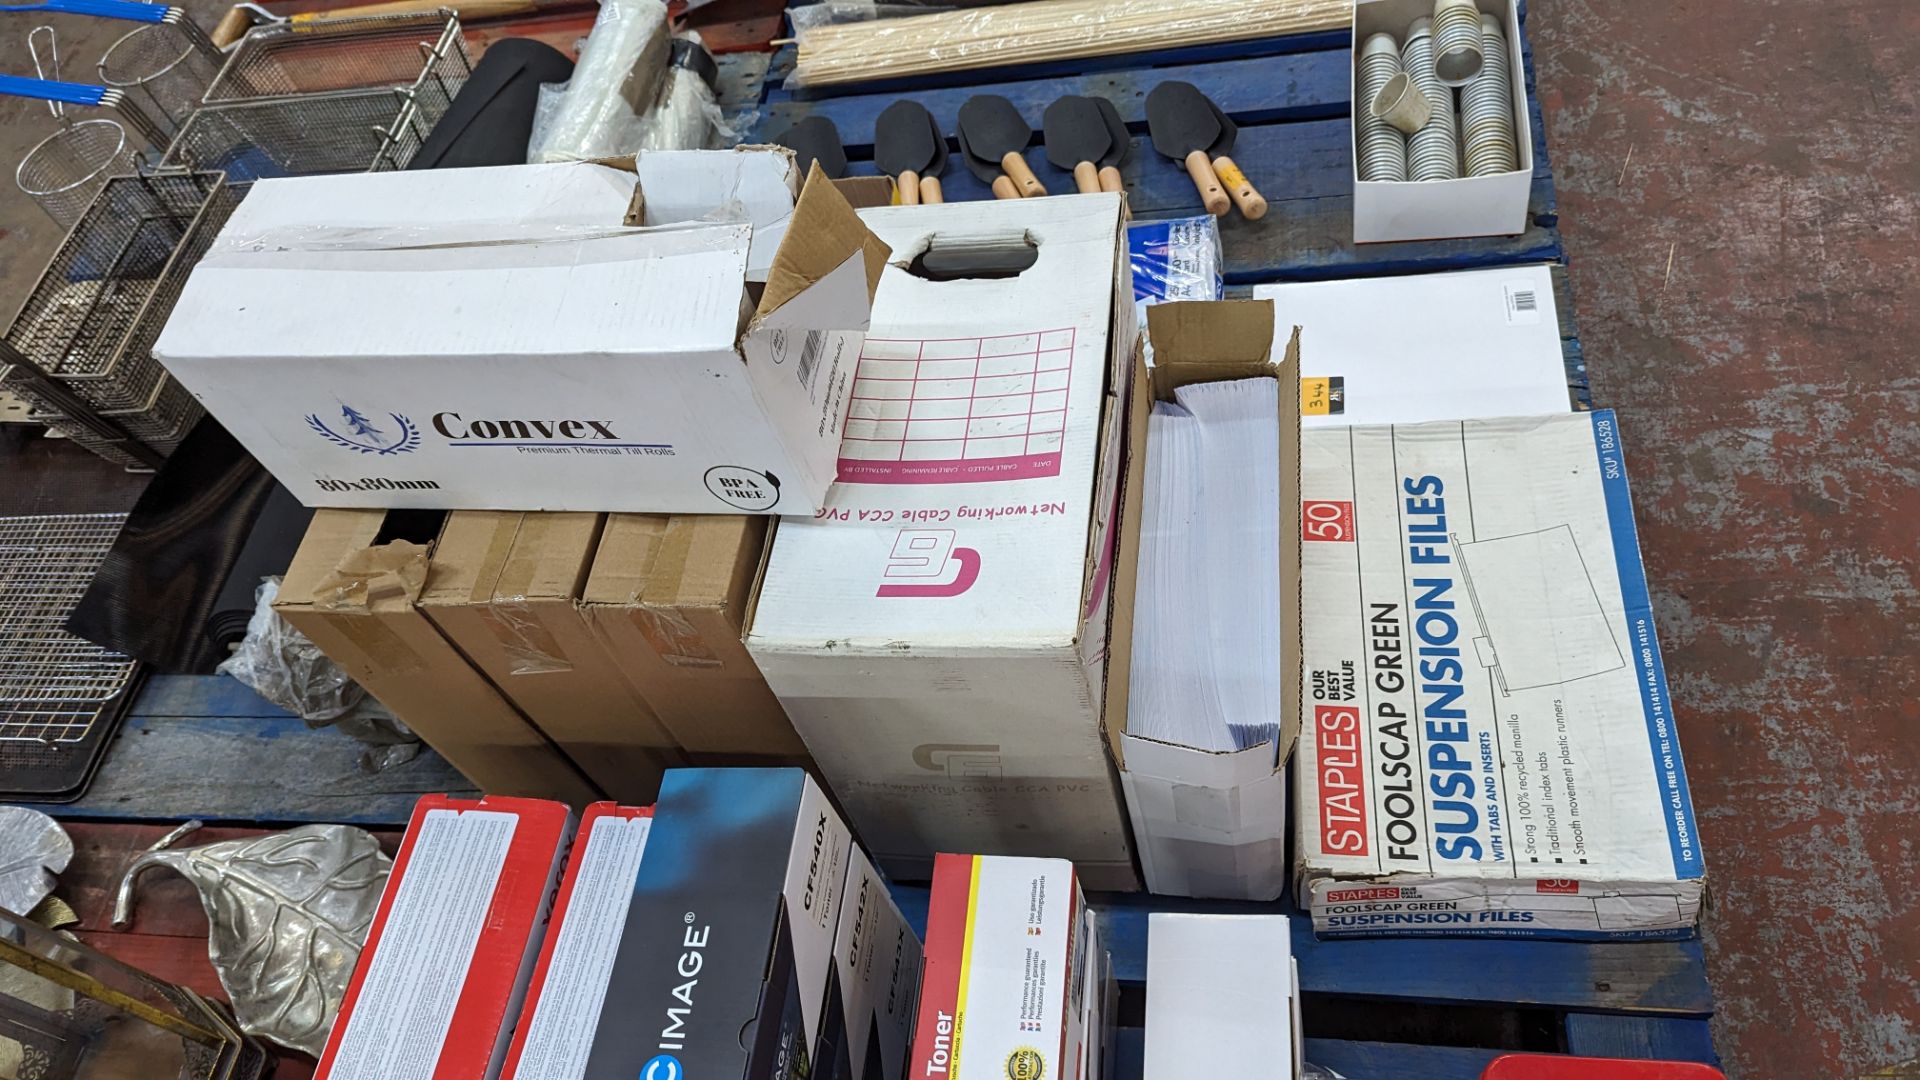 The contents of a pallet of office stationery including paper, till roll, envelopes, laser cartridge - Image 7 of 8